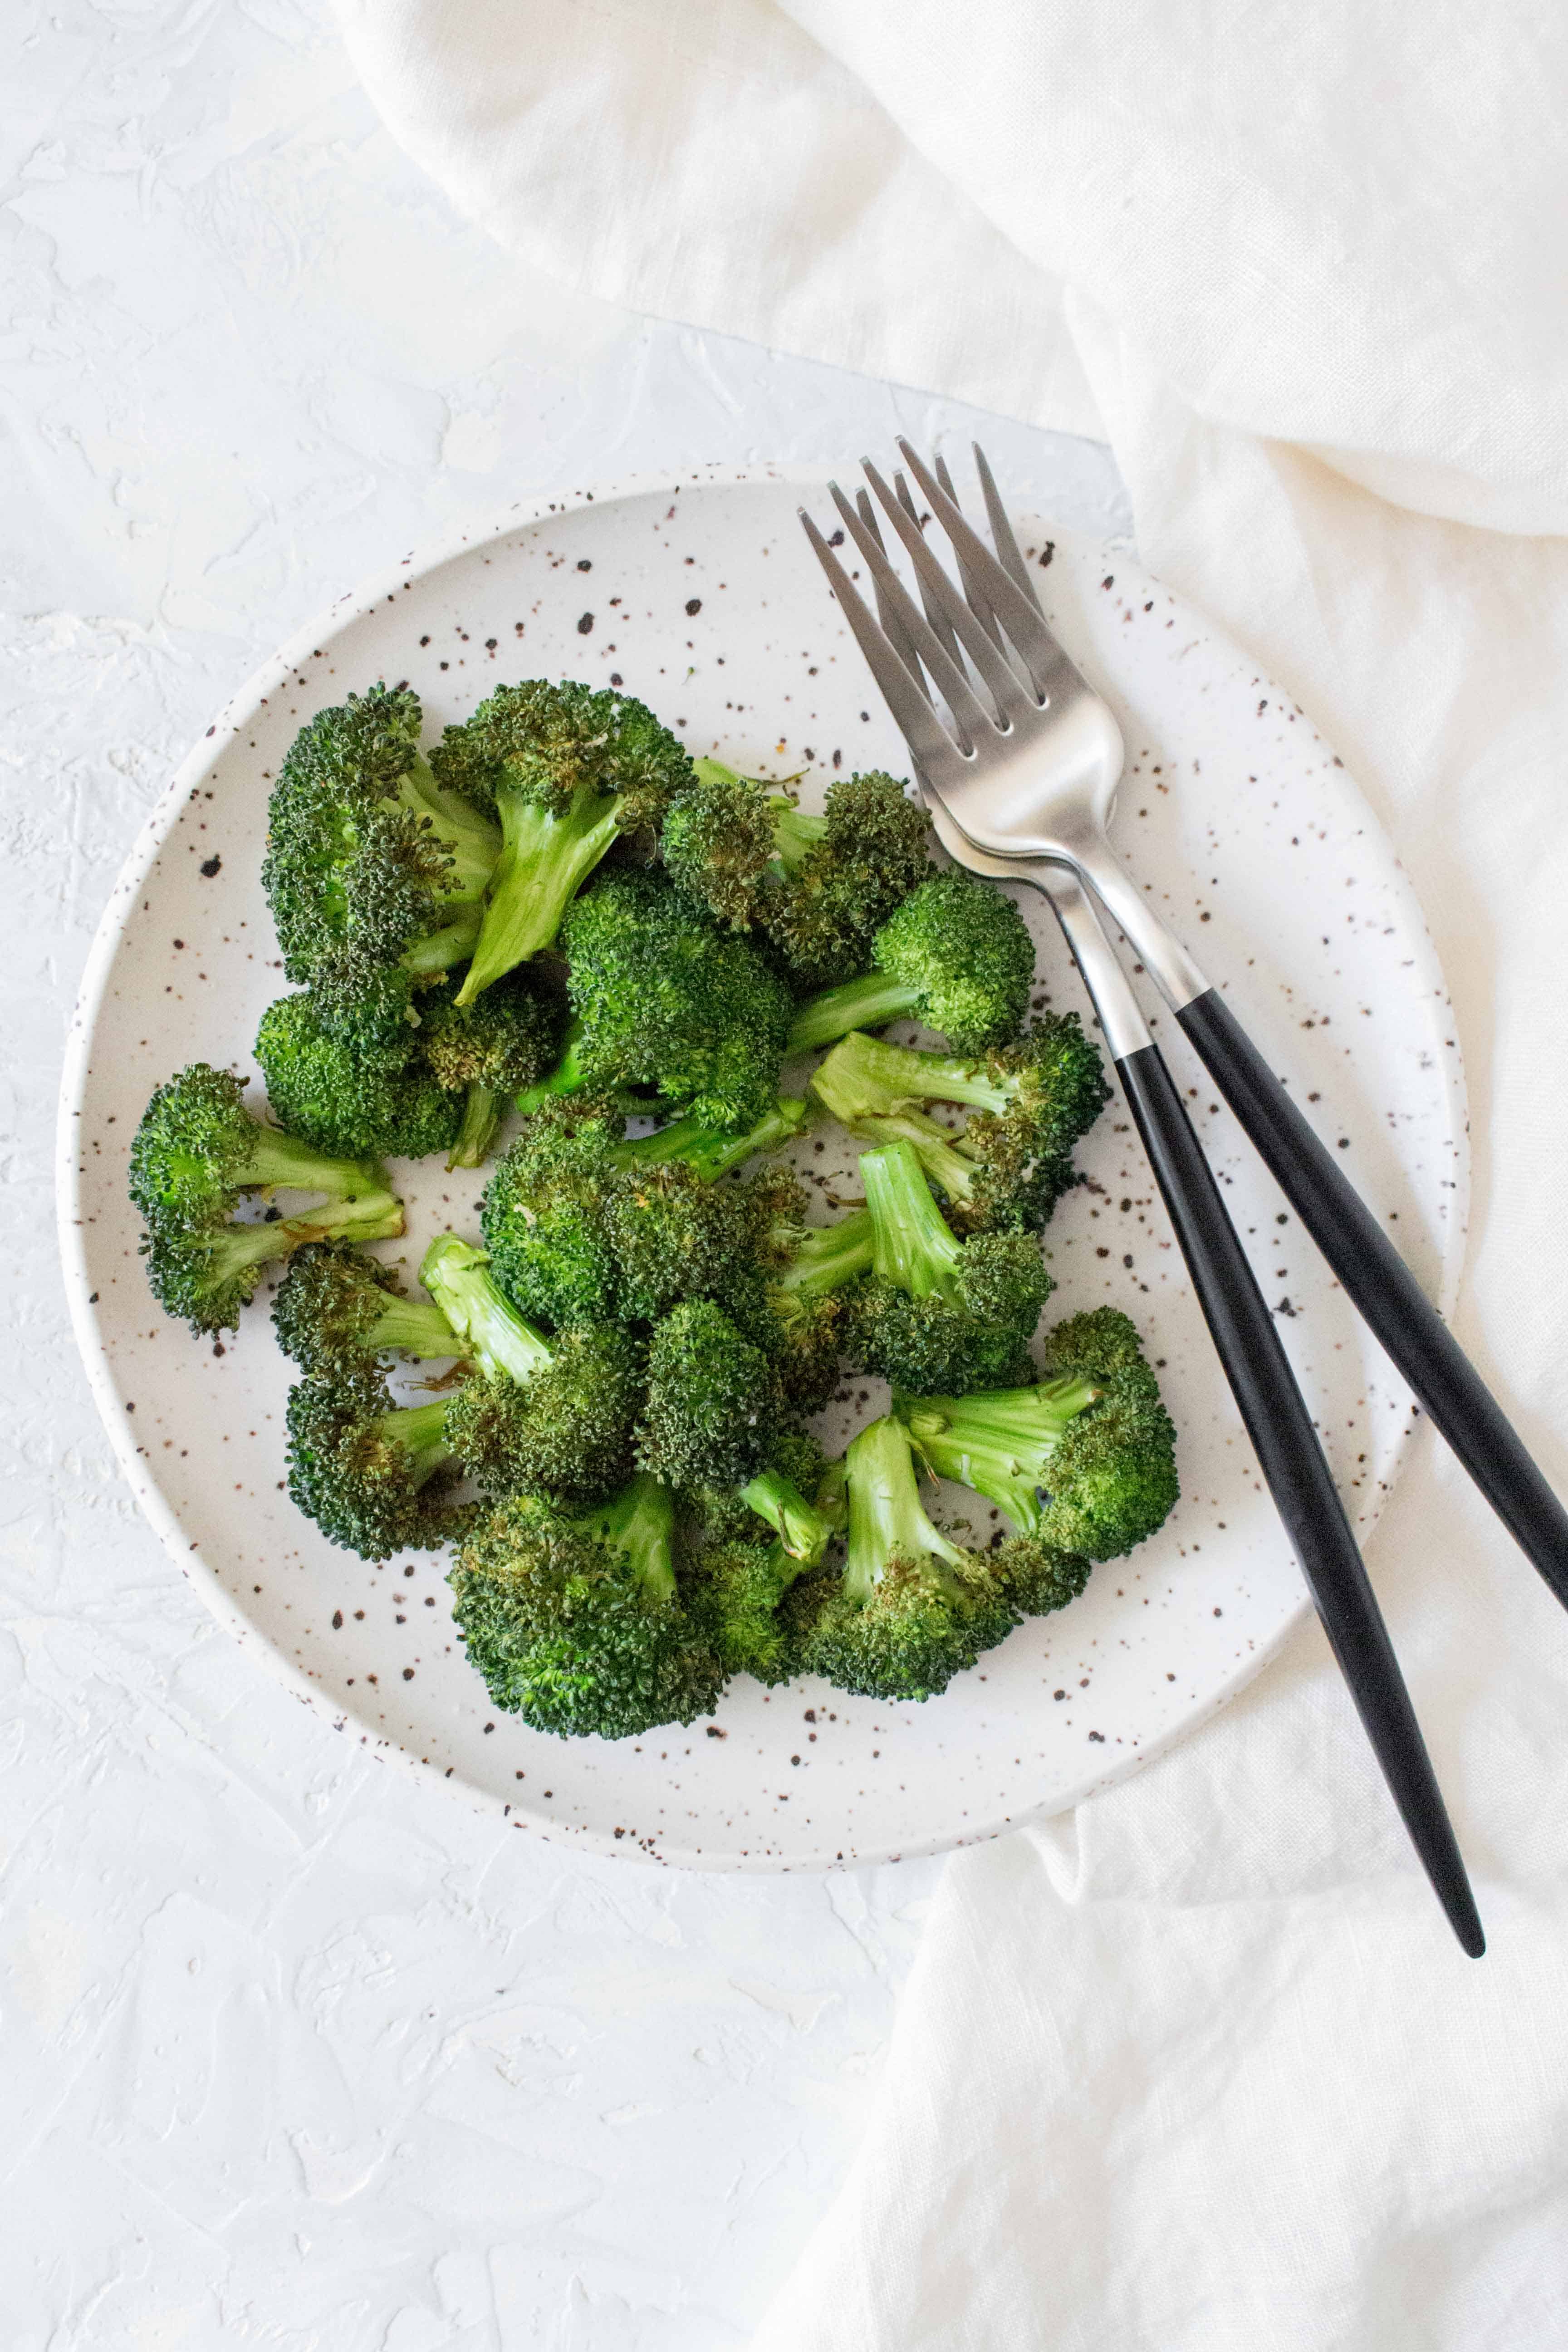 Curious as to how to make crispy broccoli with an air fryer? Here's how you can quickly make Easy Air Fryer Broccoli!